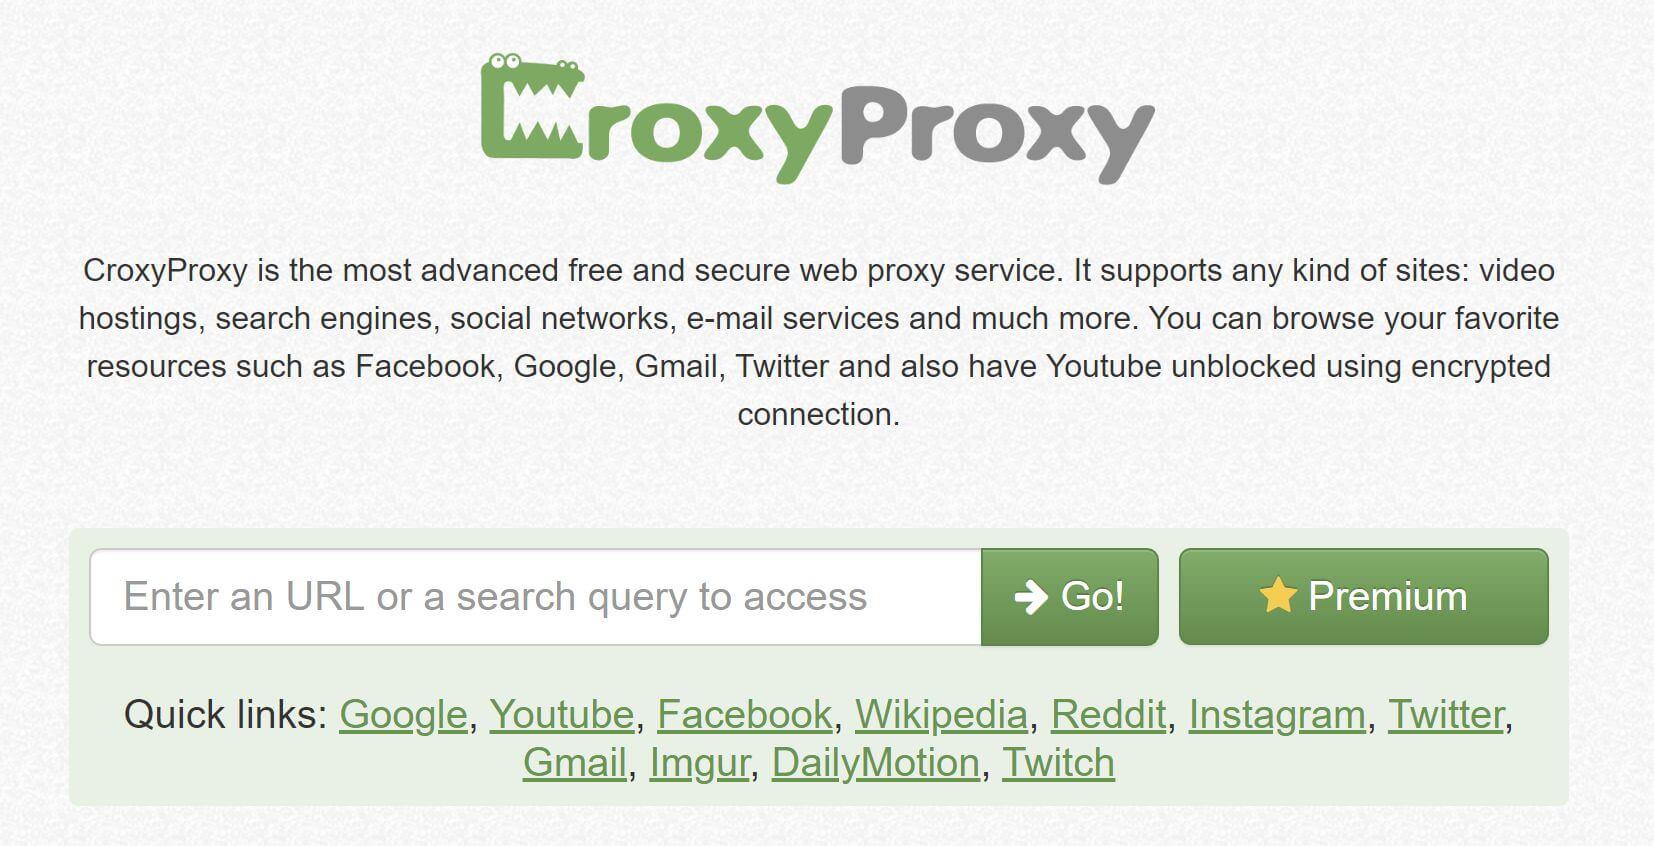 Get Naughty and Unblock YouTube with CroxyProxy